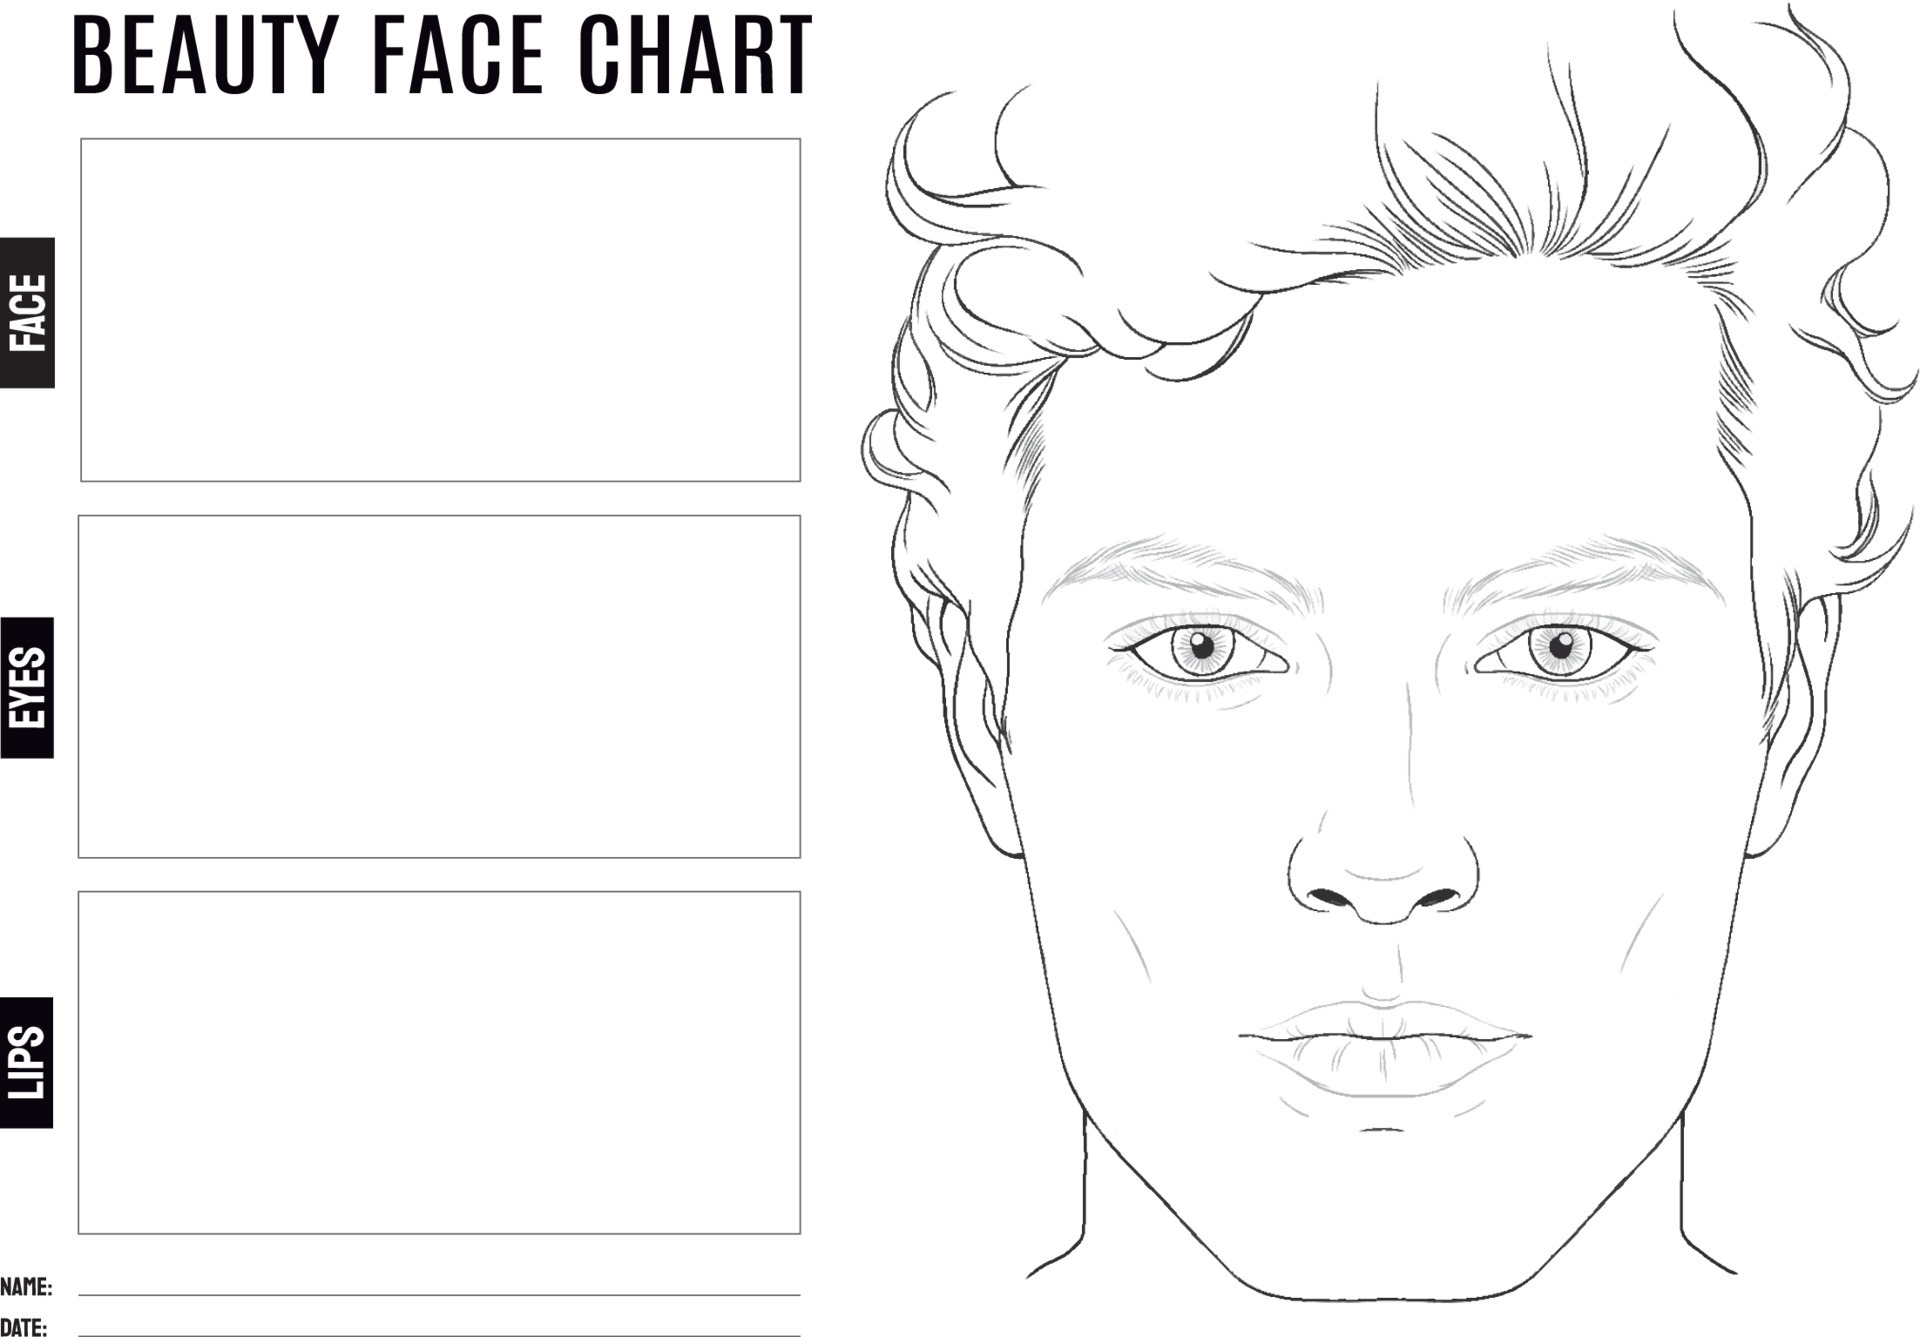 Beauty Face Chart for Makeup with Hand